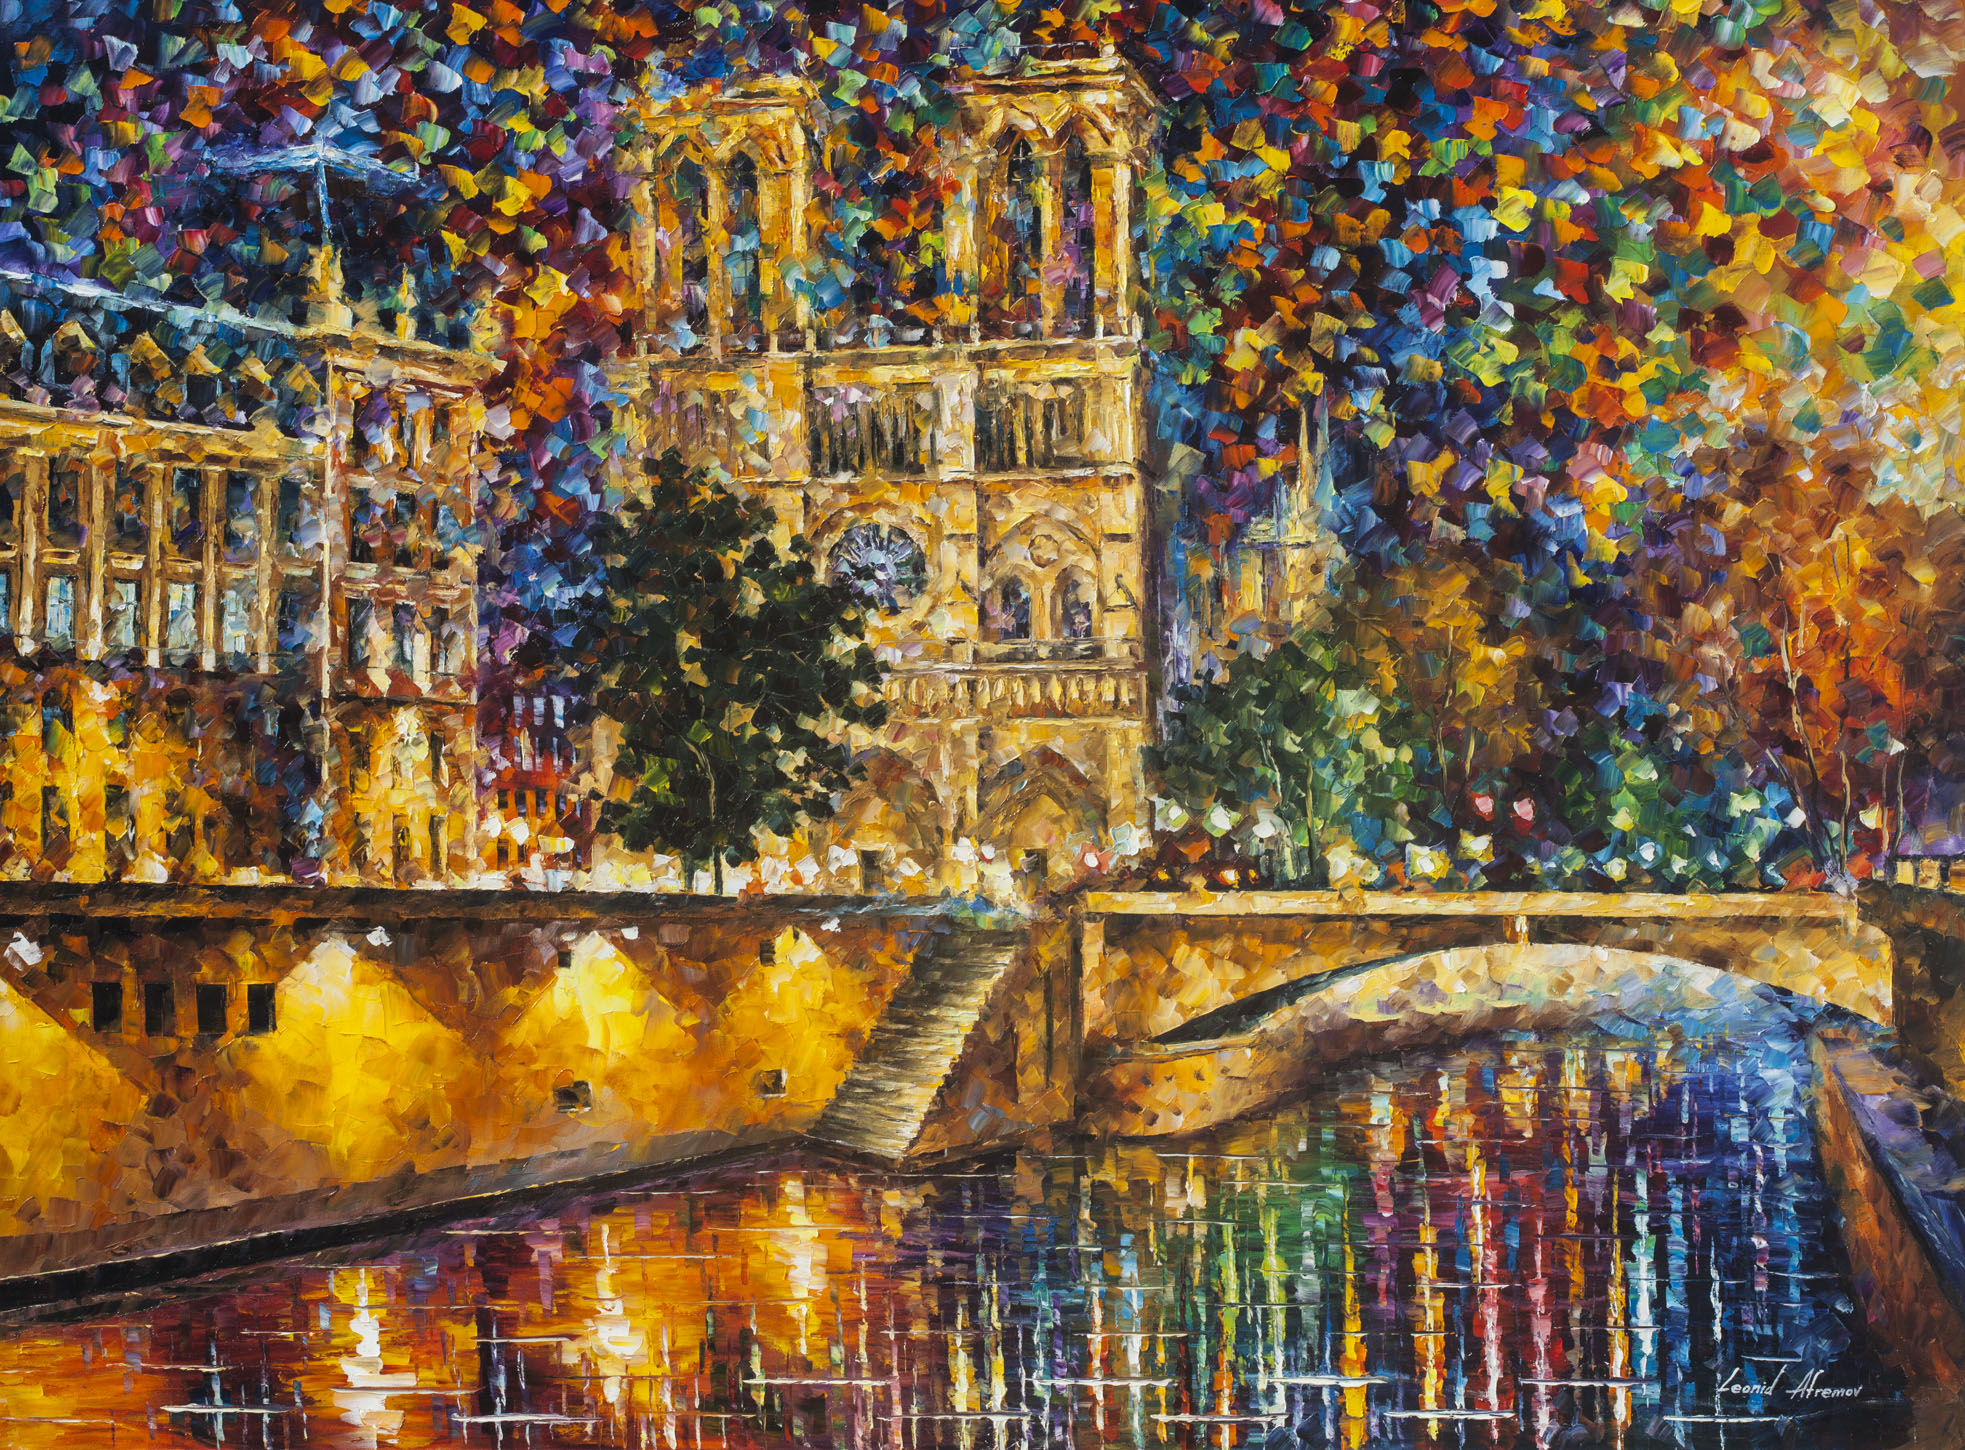 PARIS - NOTRE DAME CATHEDRAL - Palette Knife Oil Painting On Canvas ...